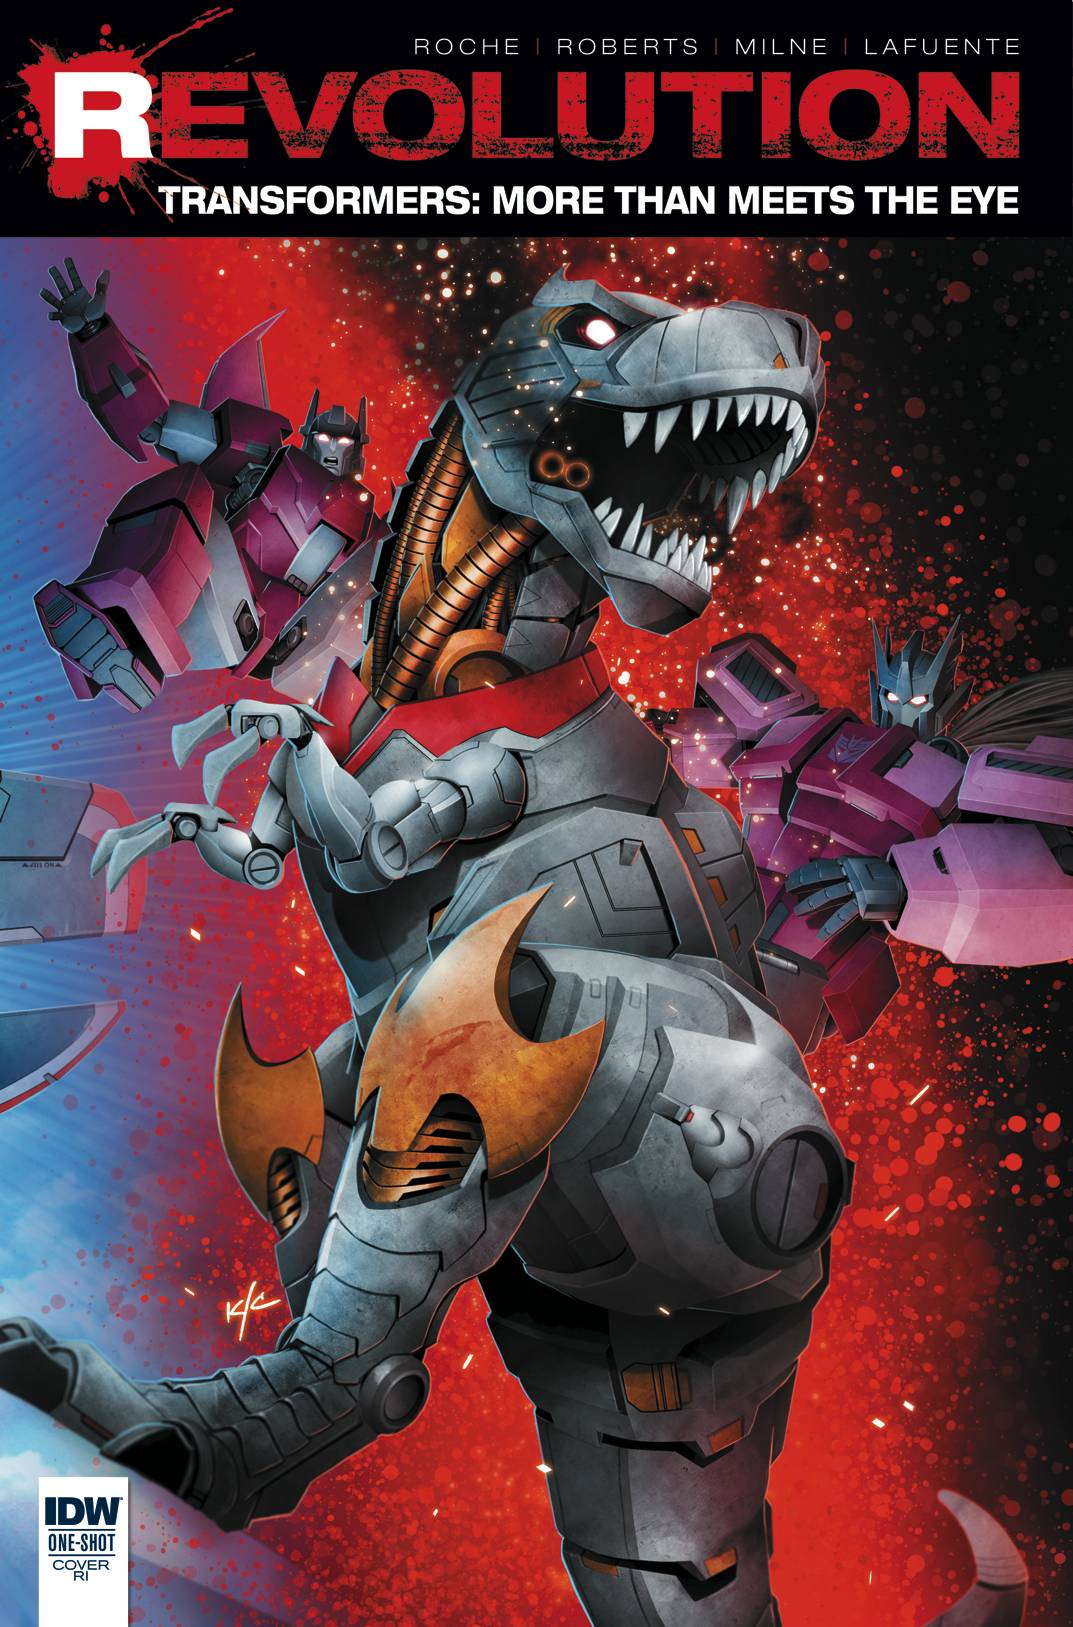 Transformers More Than Meets The Eye Revolution #1 1 for 10 Incentive Variant